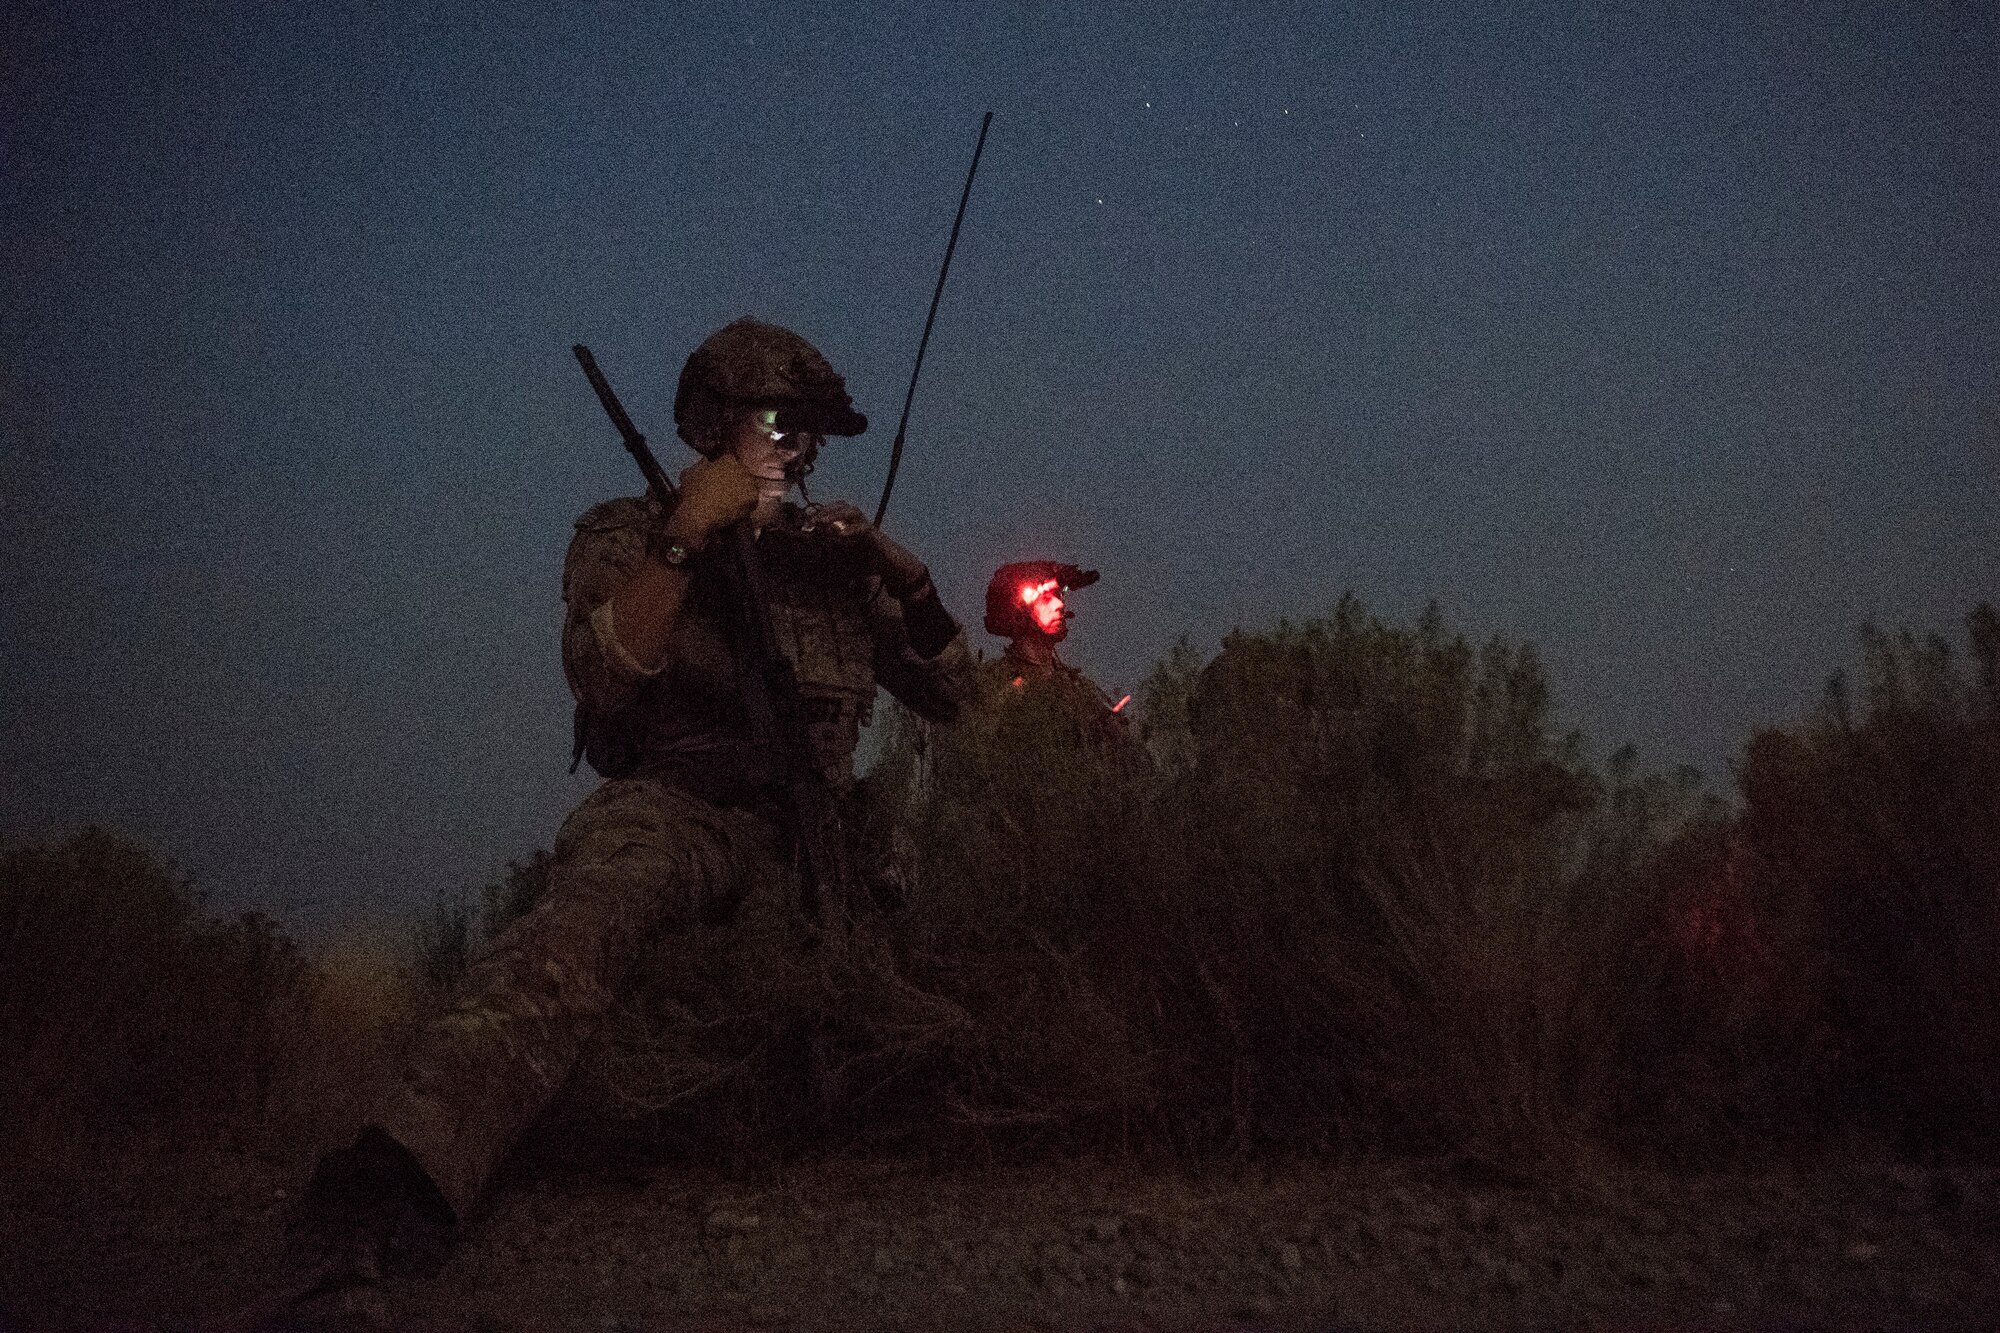 Special Tactics Airmen with the 17th Special Tactics Squadron reviews target positions during Jaded Thunder at Mountain Home Air Force Base, Idaho, Aug. 20, 2018.